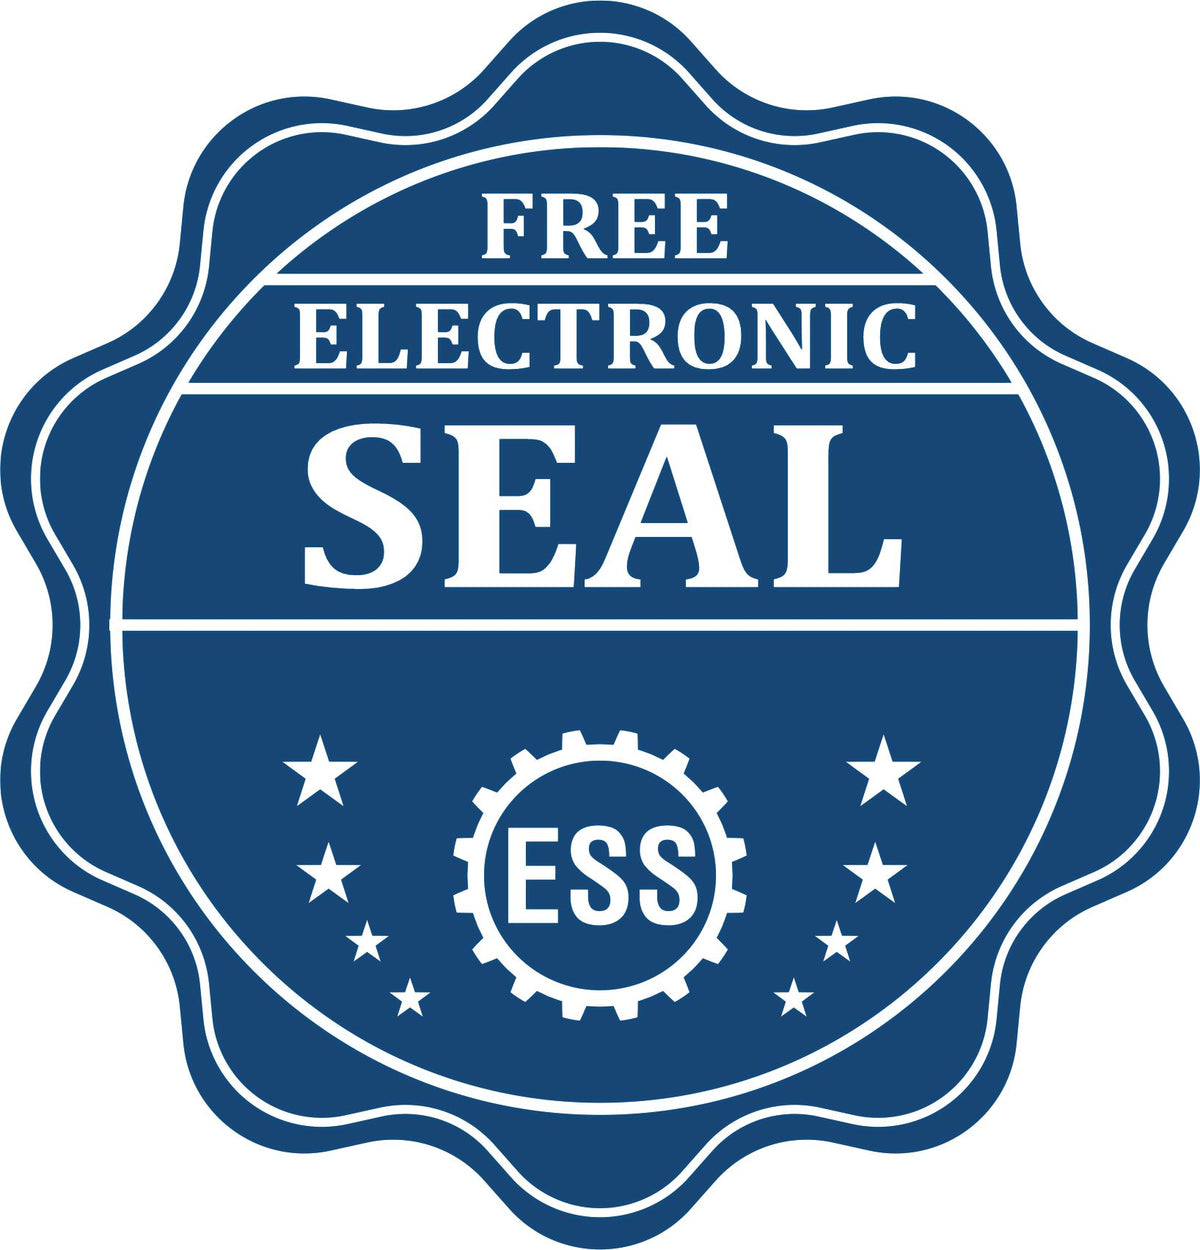 A badge showing a free electronic seal for the Heavy-Duty New York Rectangular Notary Stamp with stars and the ESS gear on the emblem.